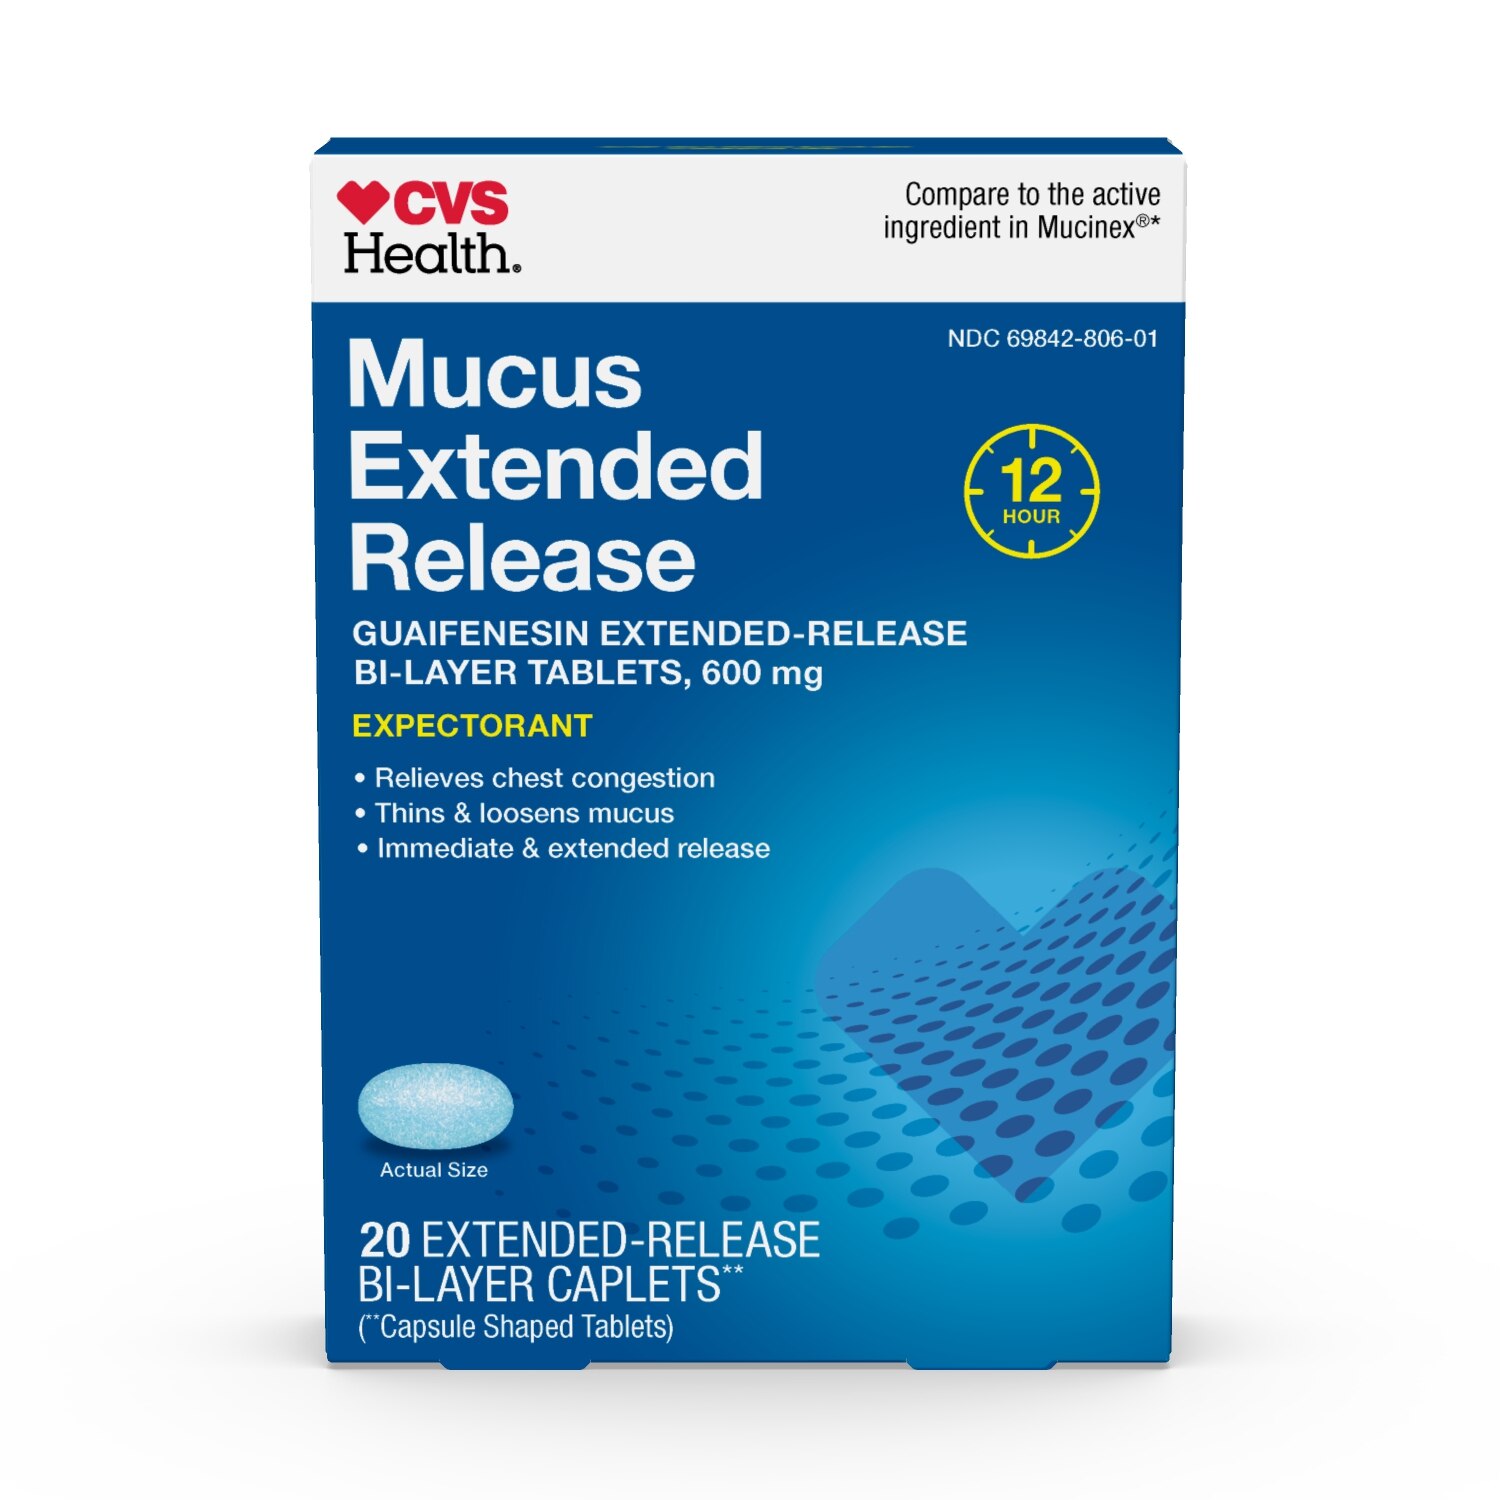 CVS Health Mucus Relief Extended-Release Bi-Layer Tablets, 600 mg, 12 Hour Expectorant, 20 CT